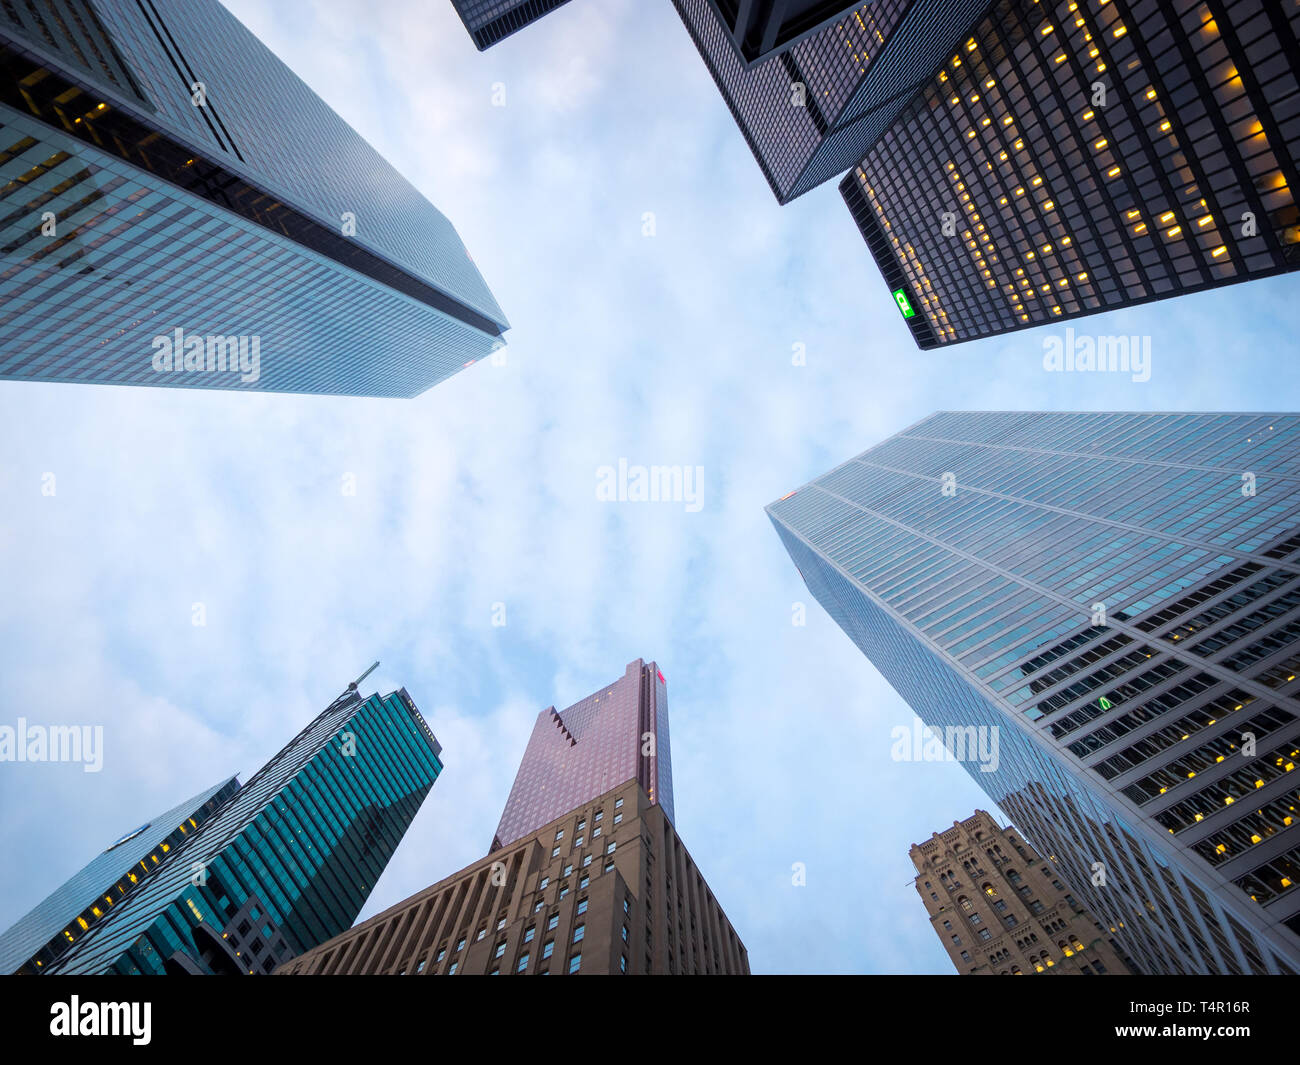 Looking up at the tall bank office towers at the intersection of Bay Street and King Street in the heart of the Financial District, Toronto, Canada. Stock Photo